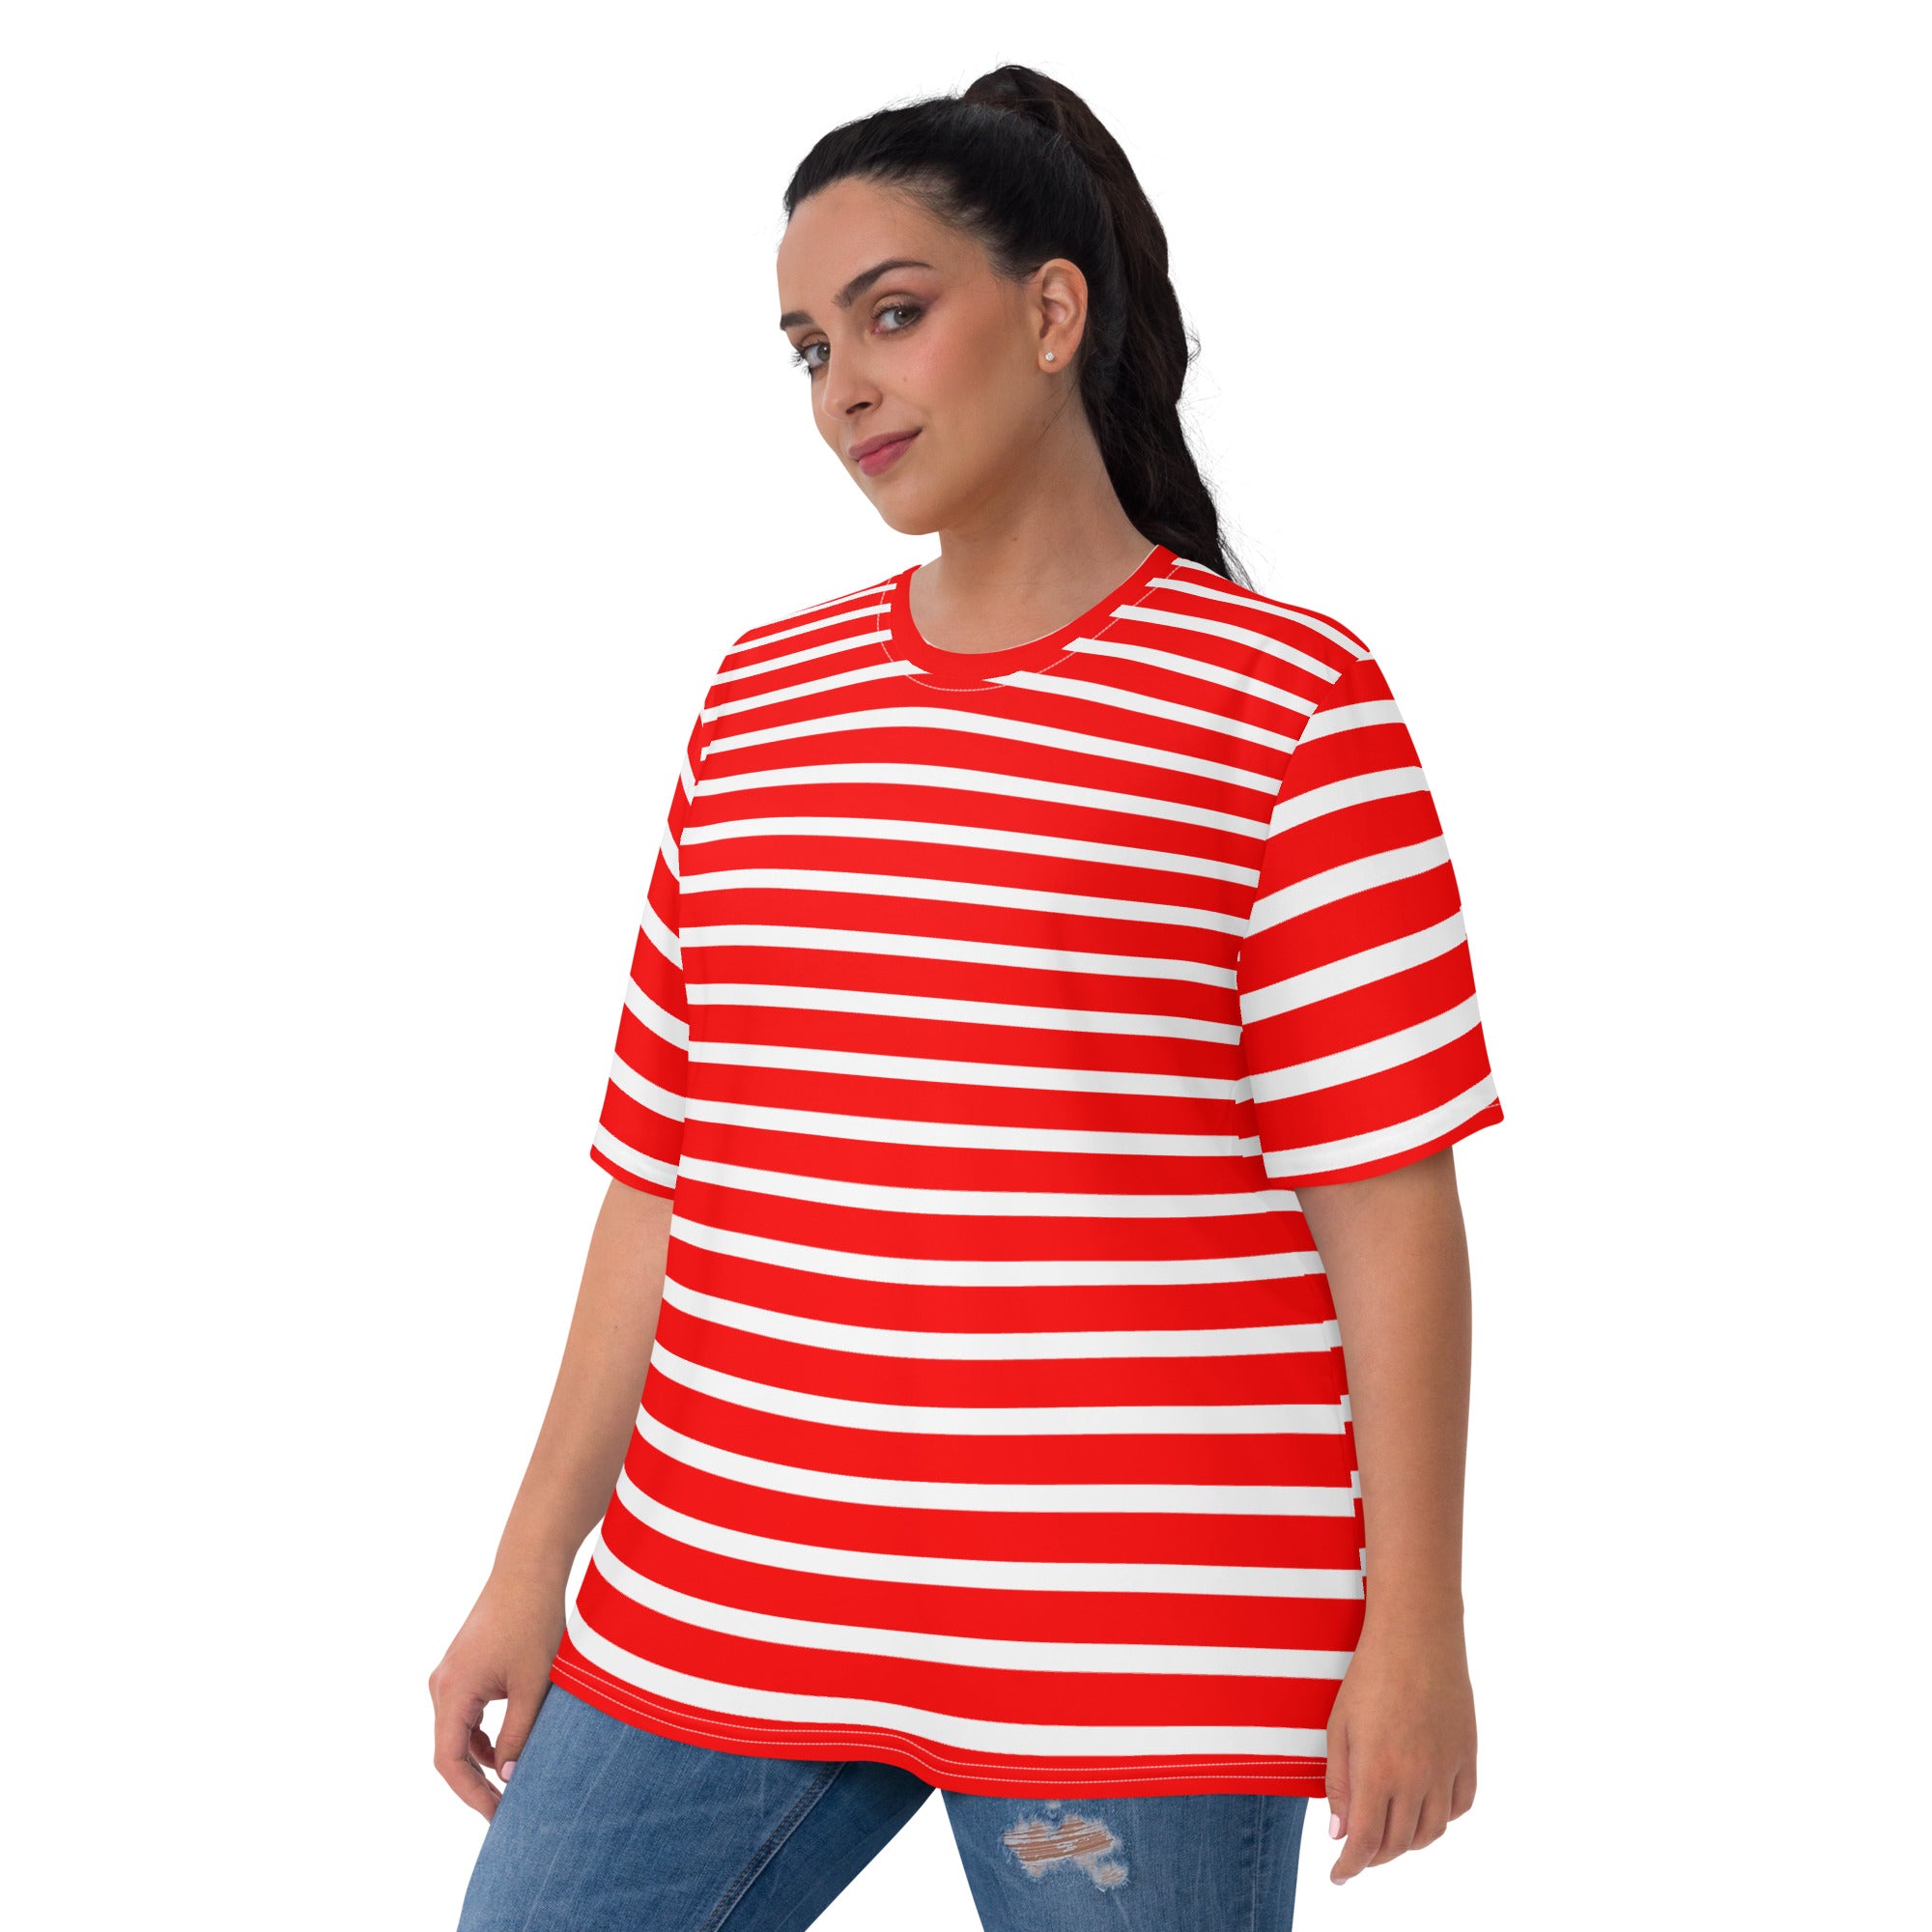 Women's T-shirt- White and Red Striped